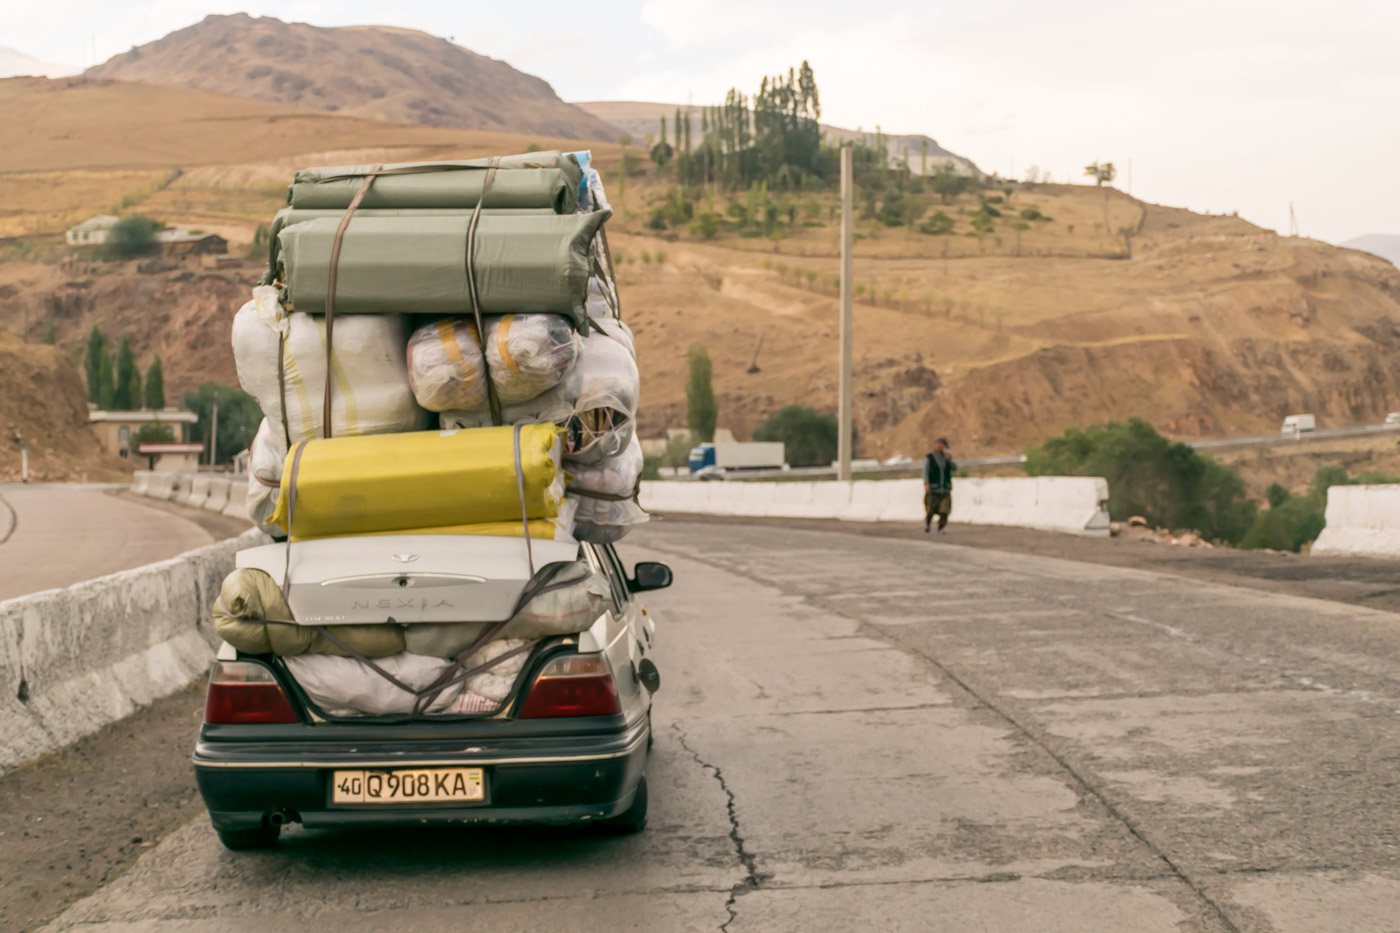 A car packed with things three times higher than the car driving in Kyrgyzstan